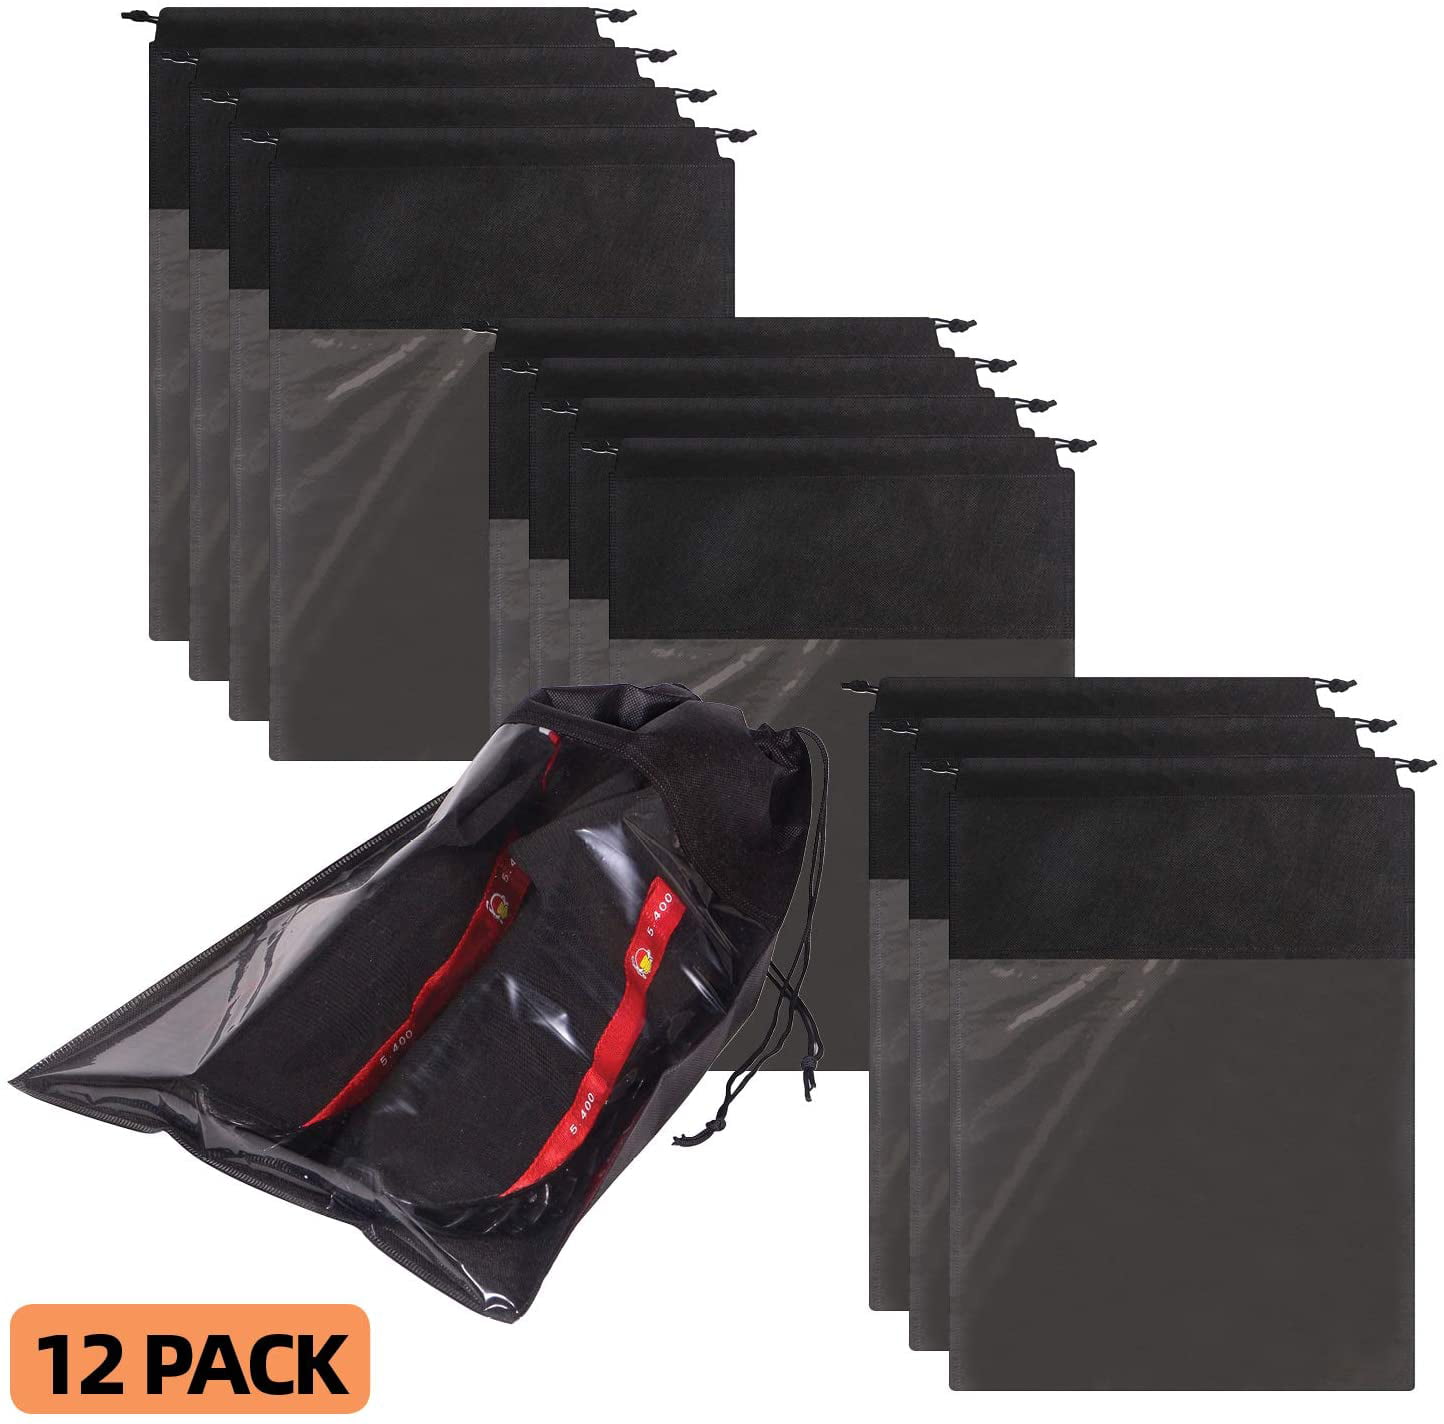 12 Pcs Travel Shoe Bags Breathable Dust-Proof Shoes Organizer Pouch Storage Bags with Transparent Window and Drawstring for Women Men Kids Black Auranso Shoe Bag